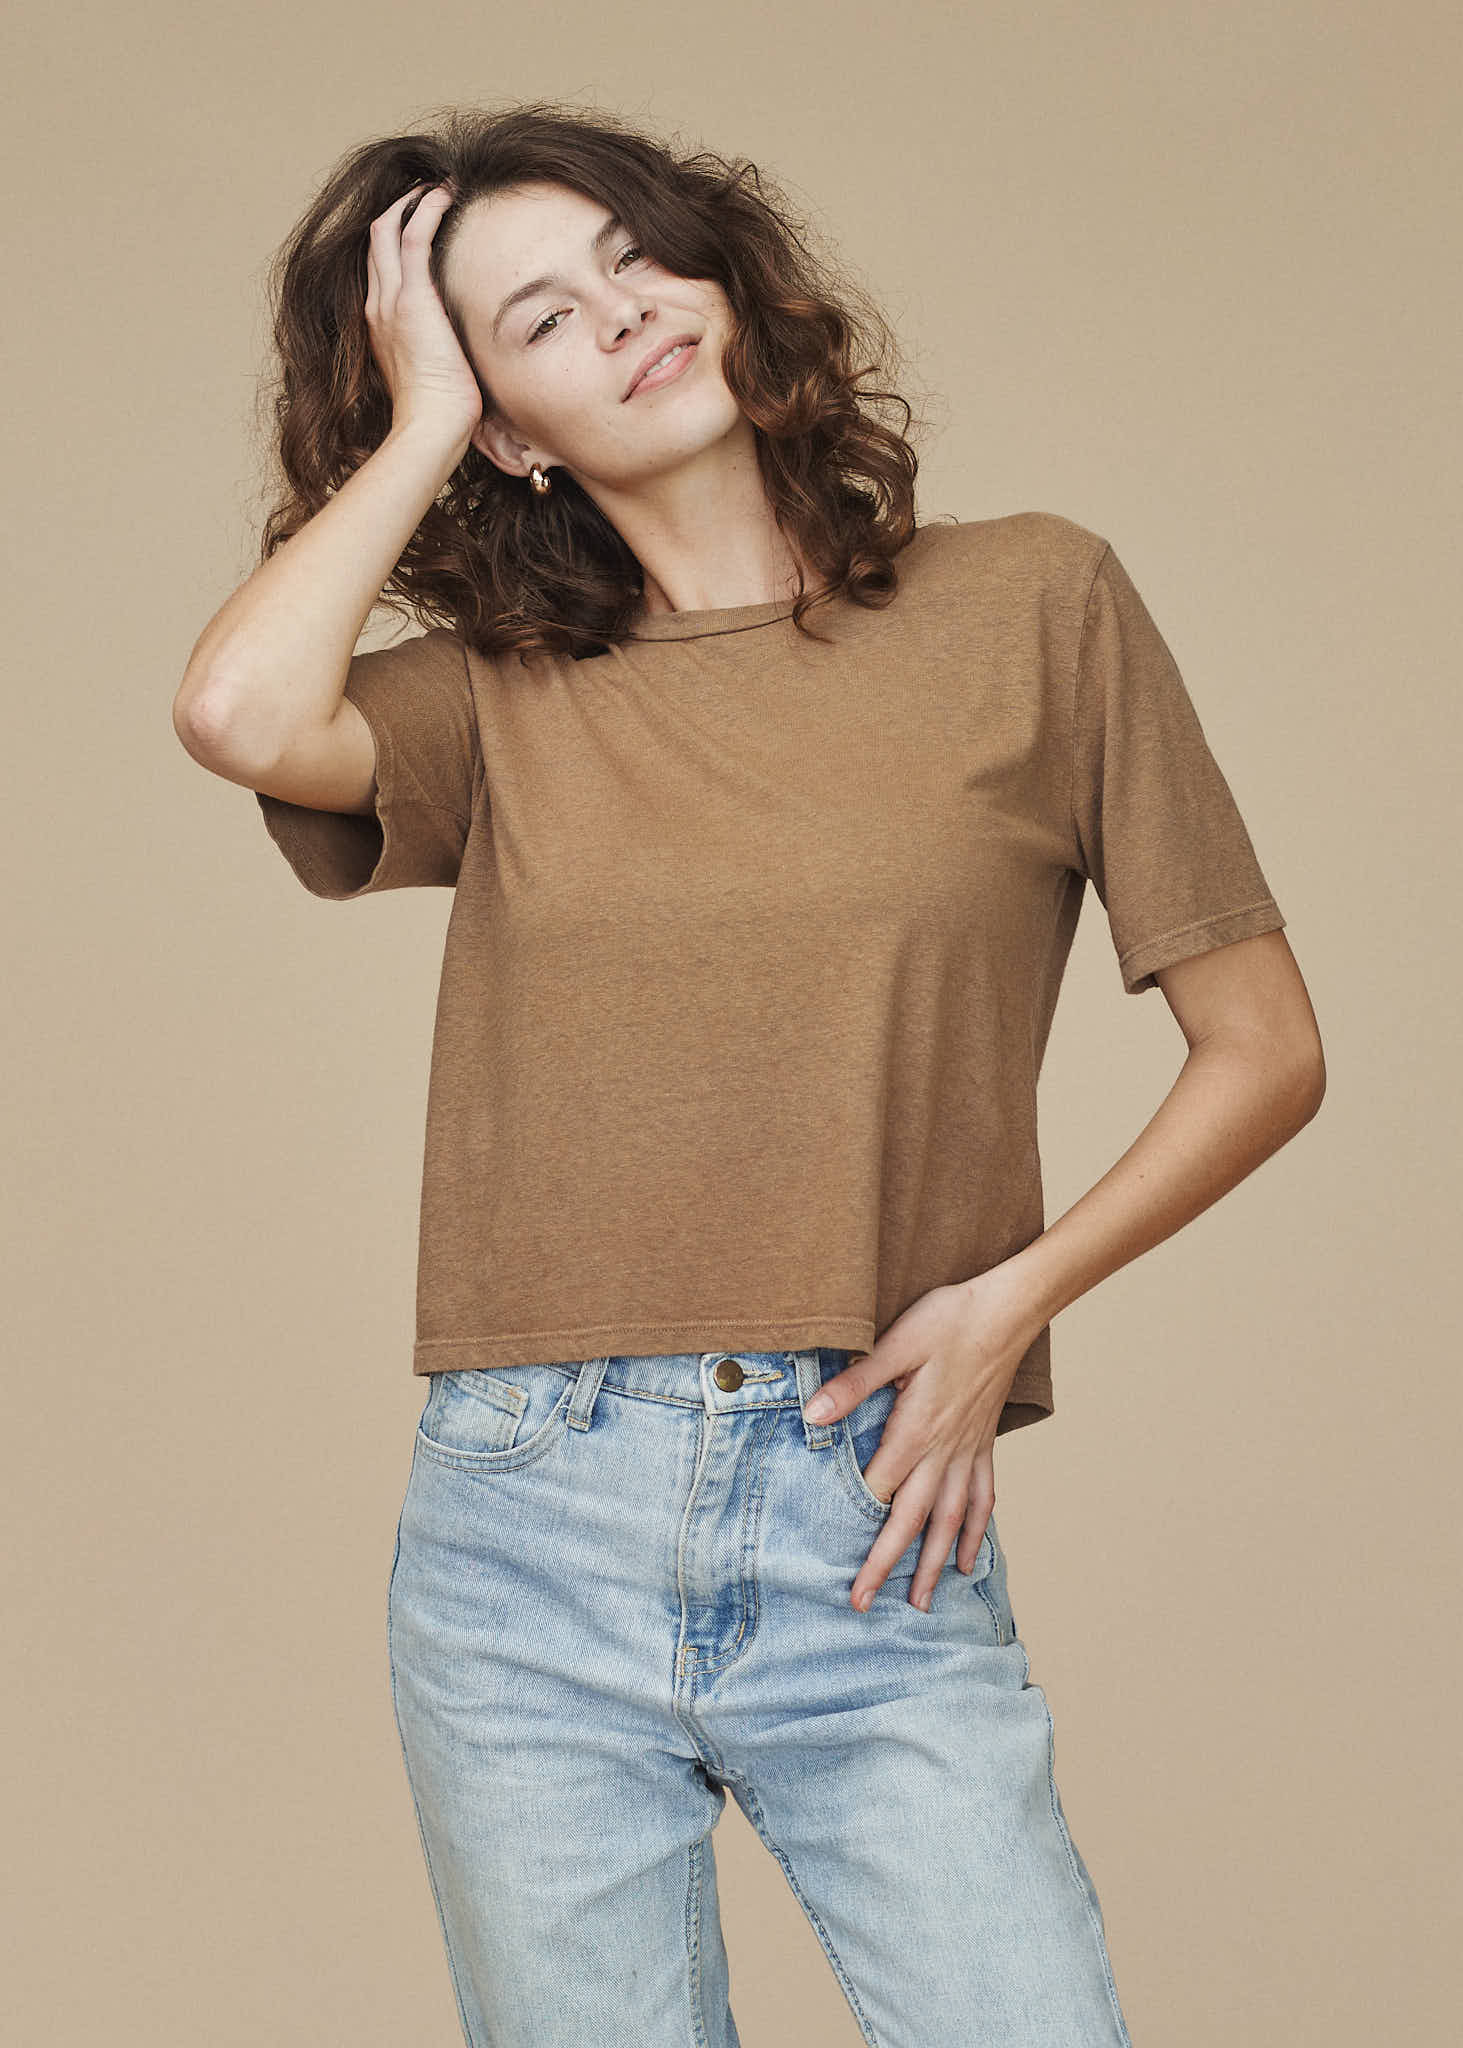 Silverlake Cropped Tee In Coyote By Jungmaven